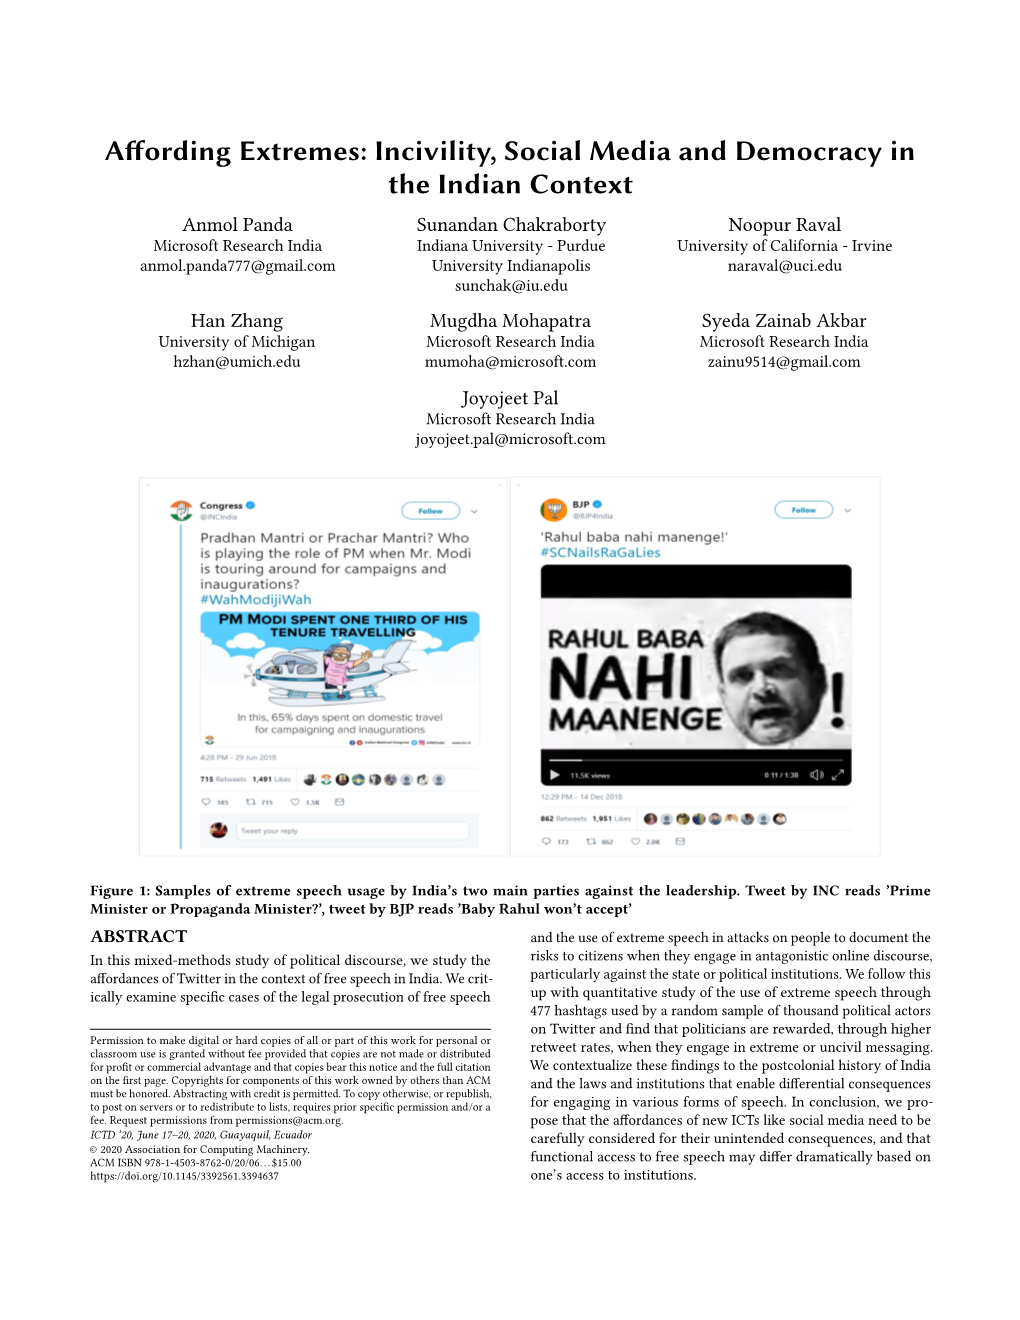 Affording Extremes: Incivility, Social Media and Democracy in the Indian Context